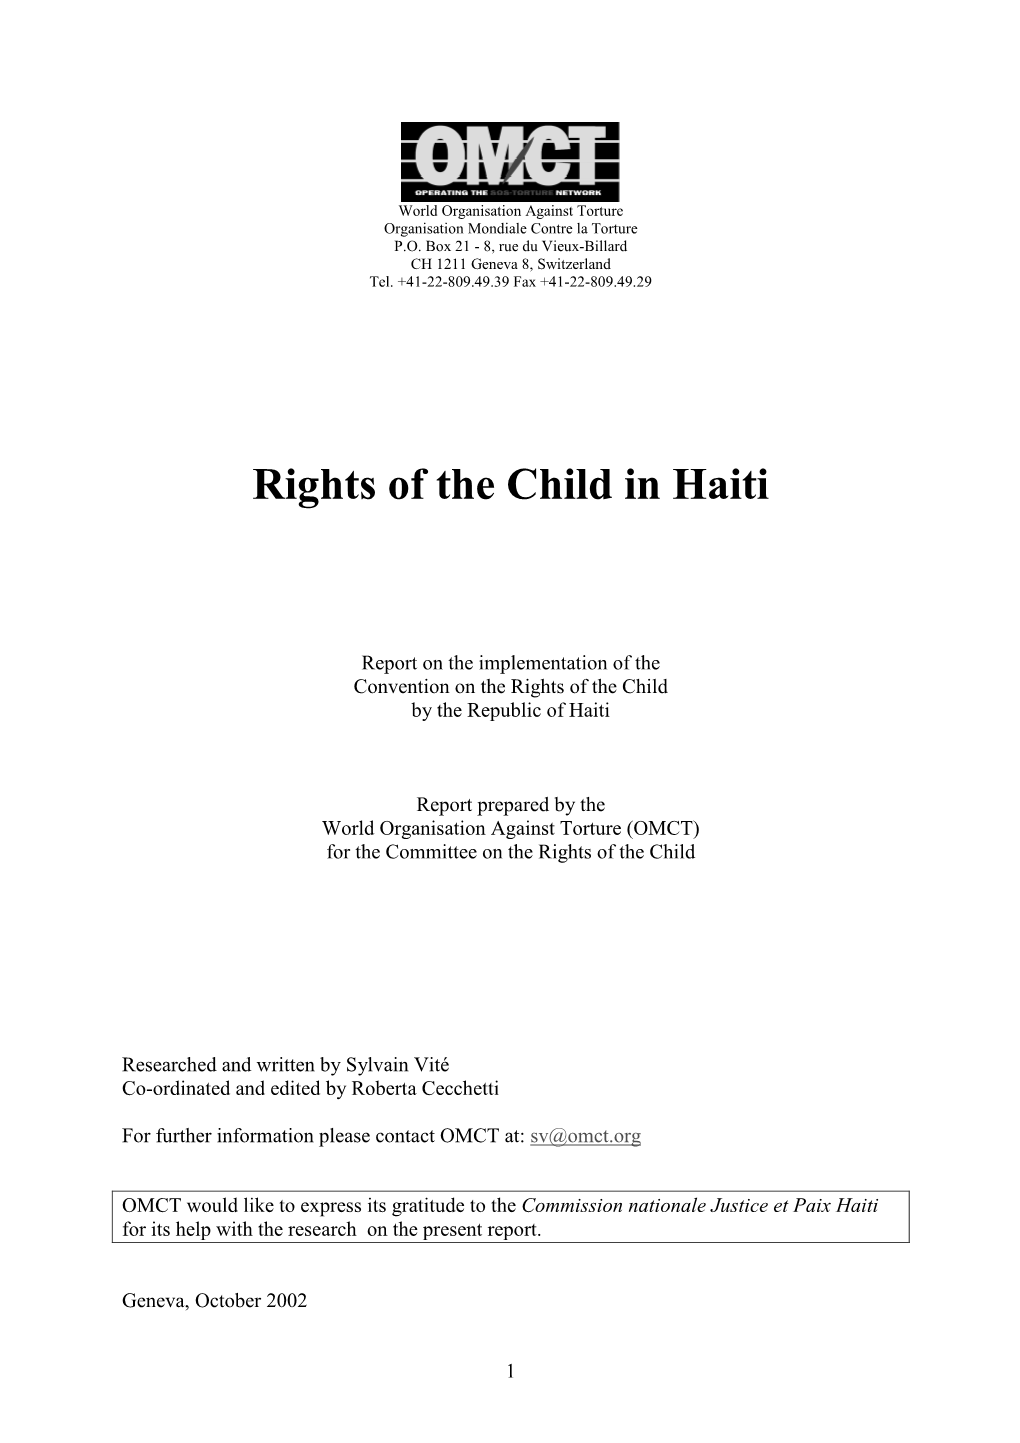 Rights of the Child in Haiti